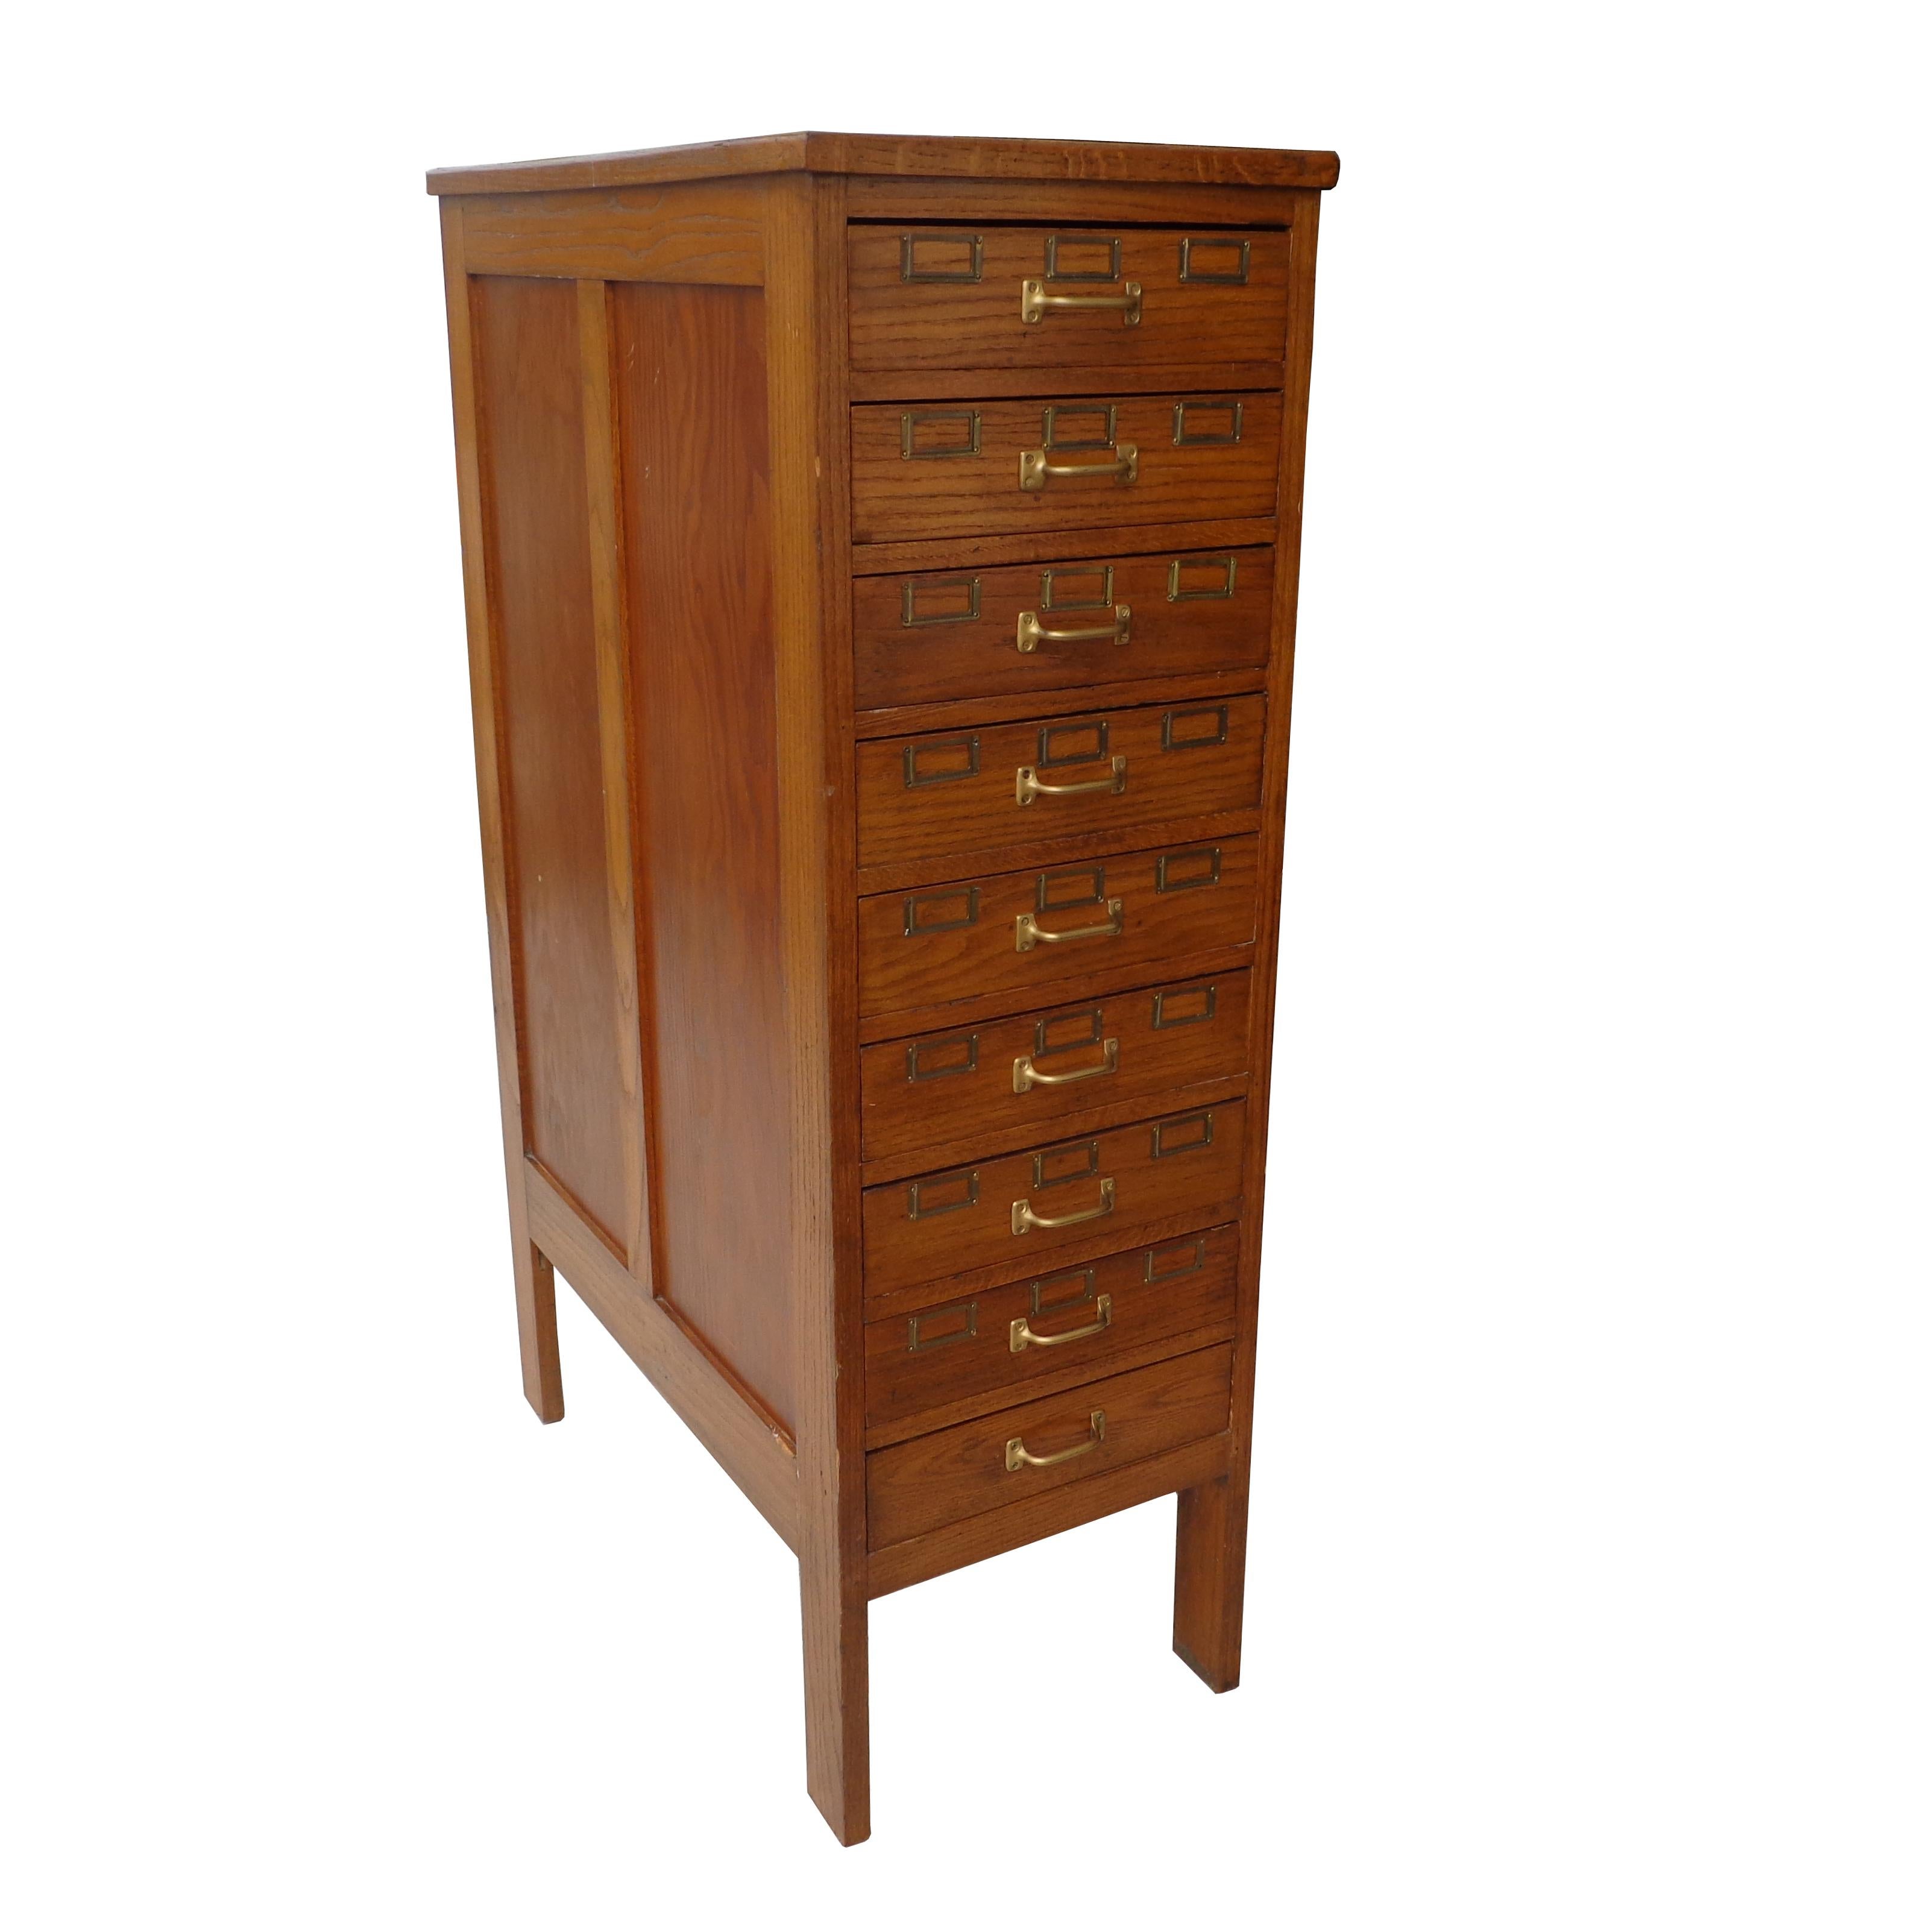 Vintage card catalogue cabinet

Rare narrow footprint card catalogue or flat file cabinet. 9 drawers with removable partitions for a wider range of use.
Oak with brass pulls. Finished in back.

Measures: 17.5